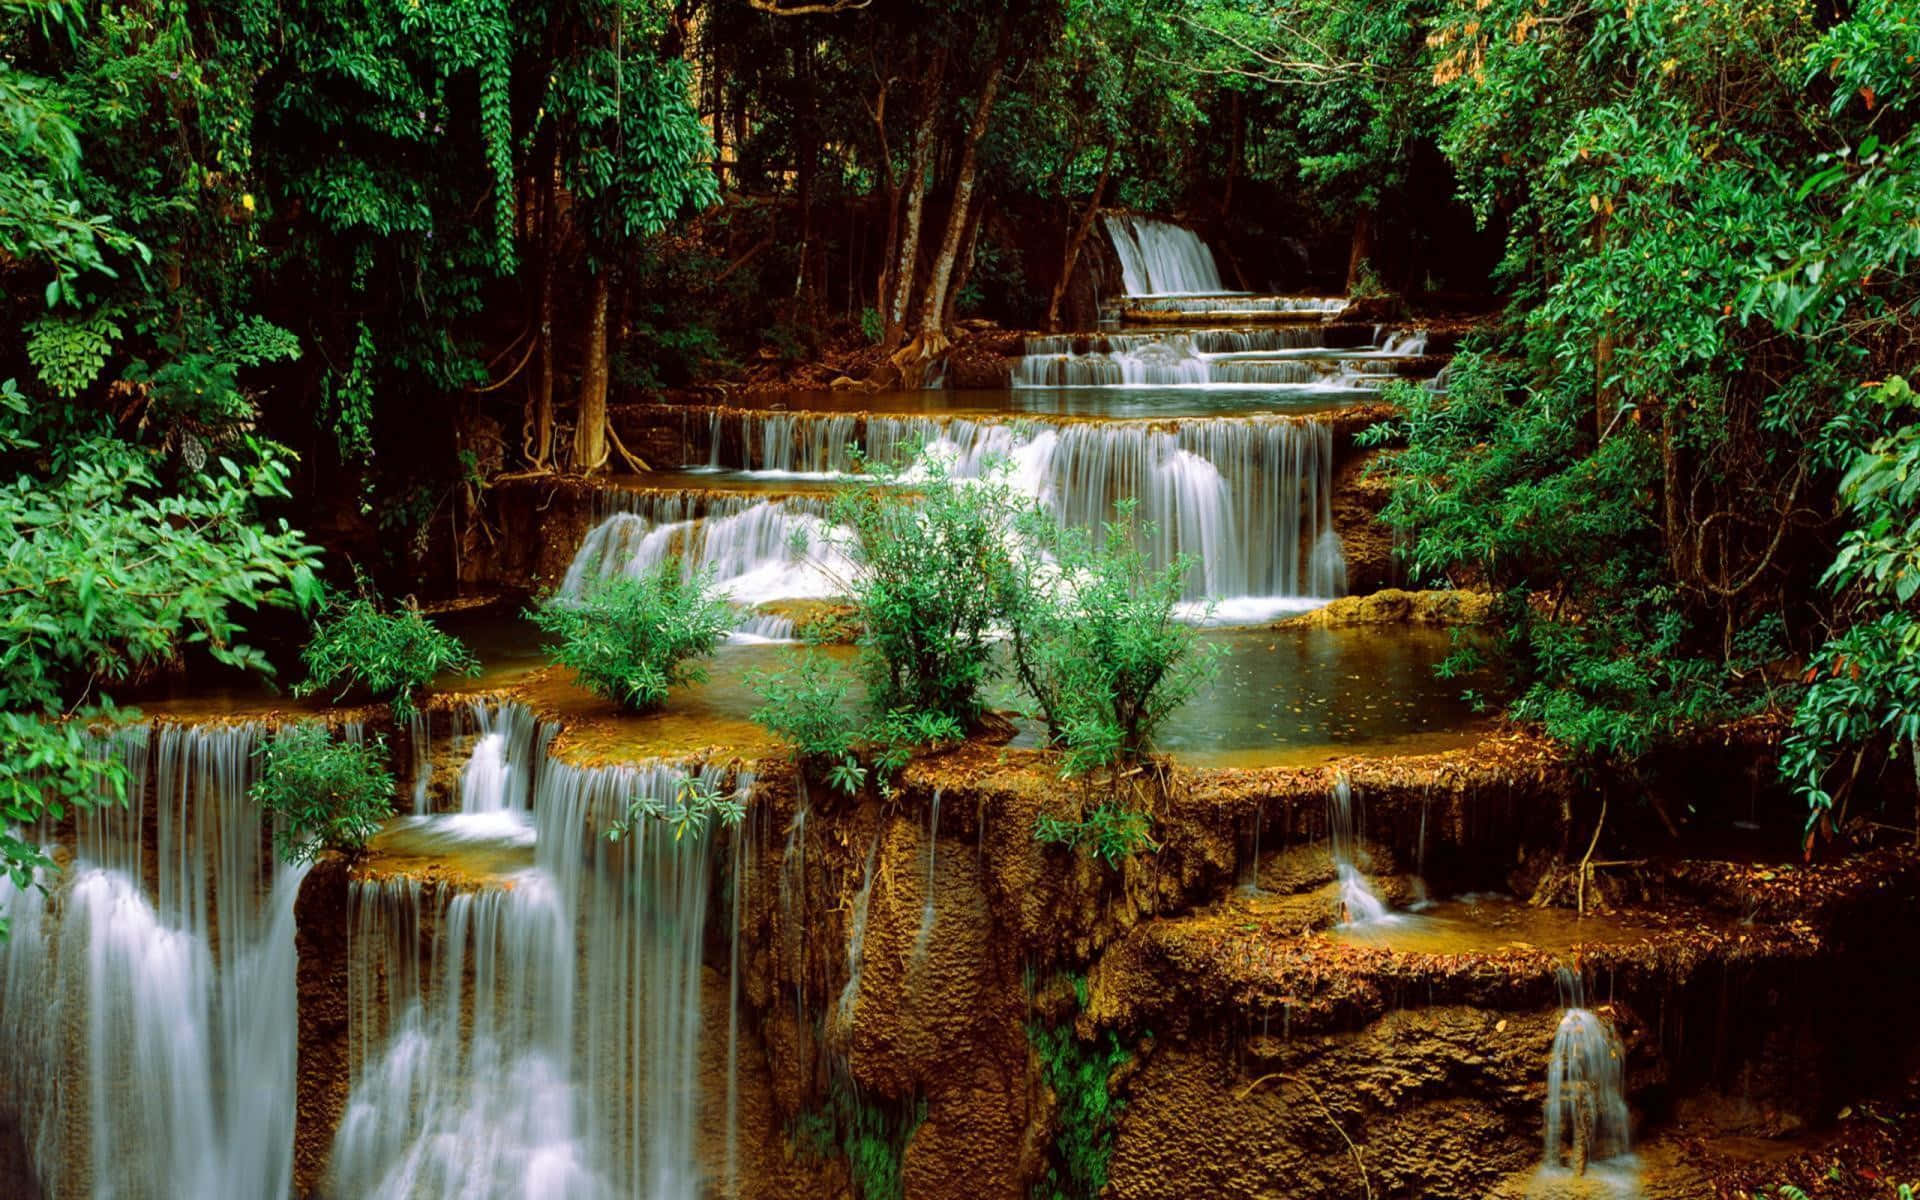 "Gorgeous Waterfall, Nature's Marvel"